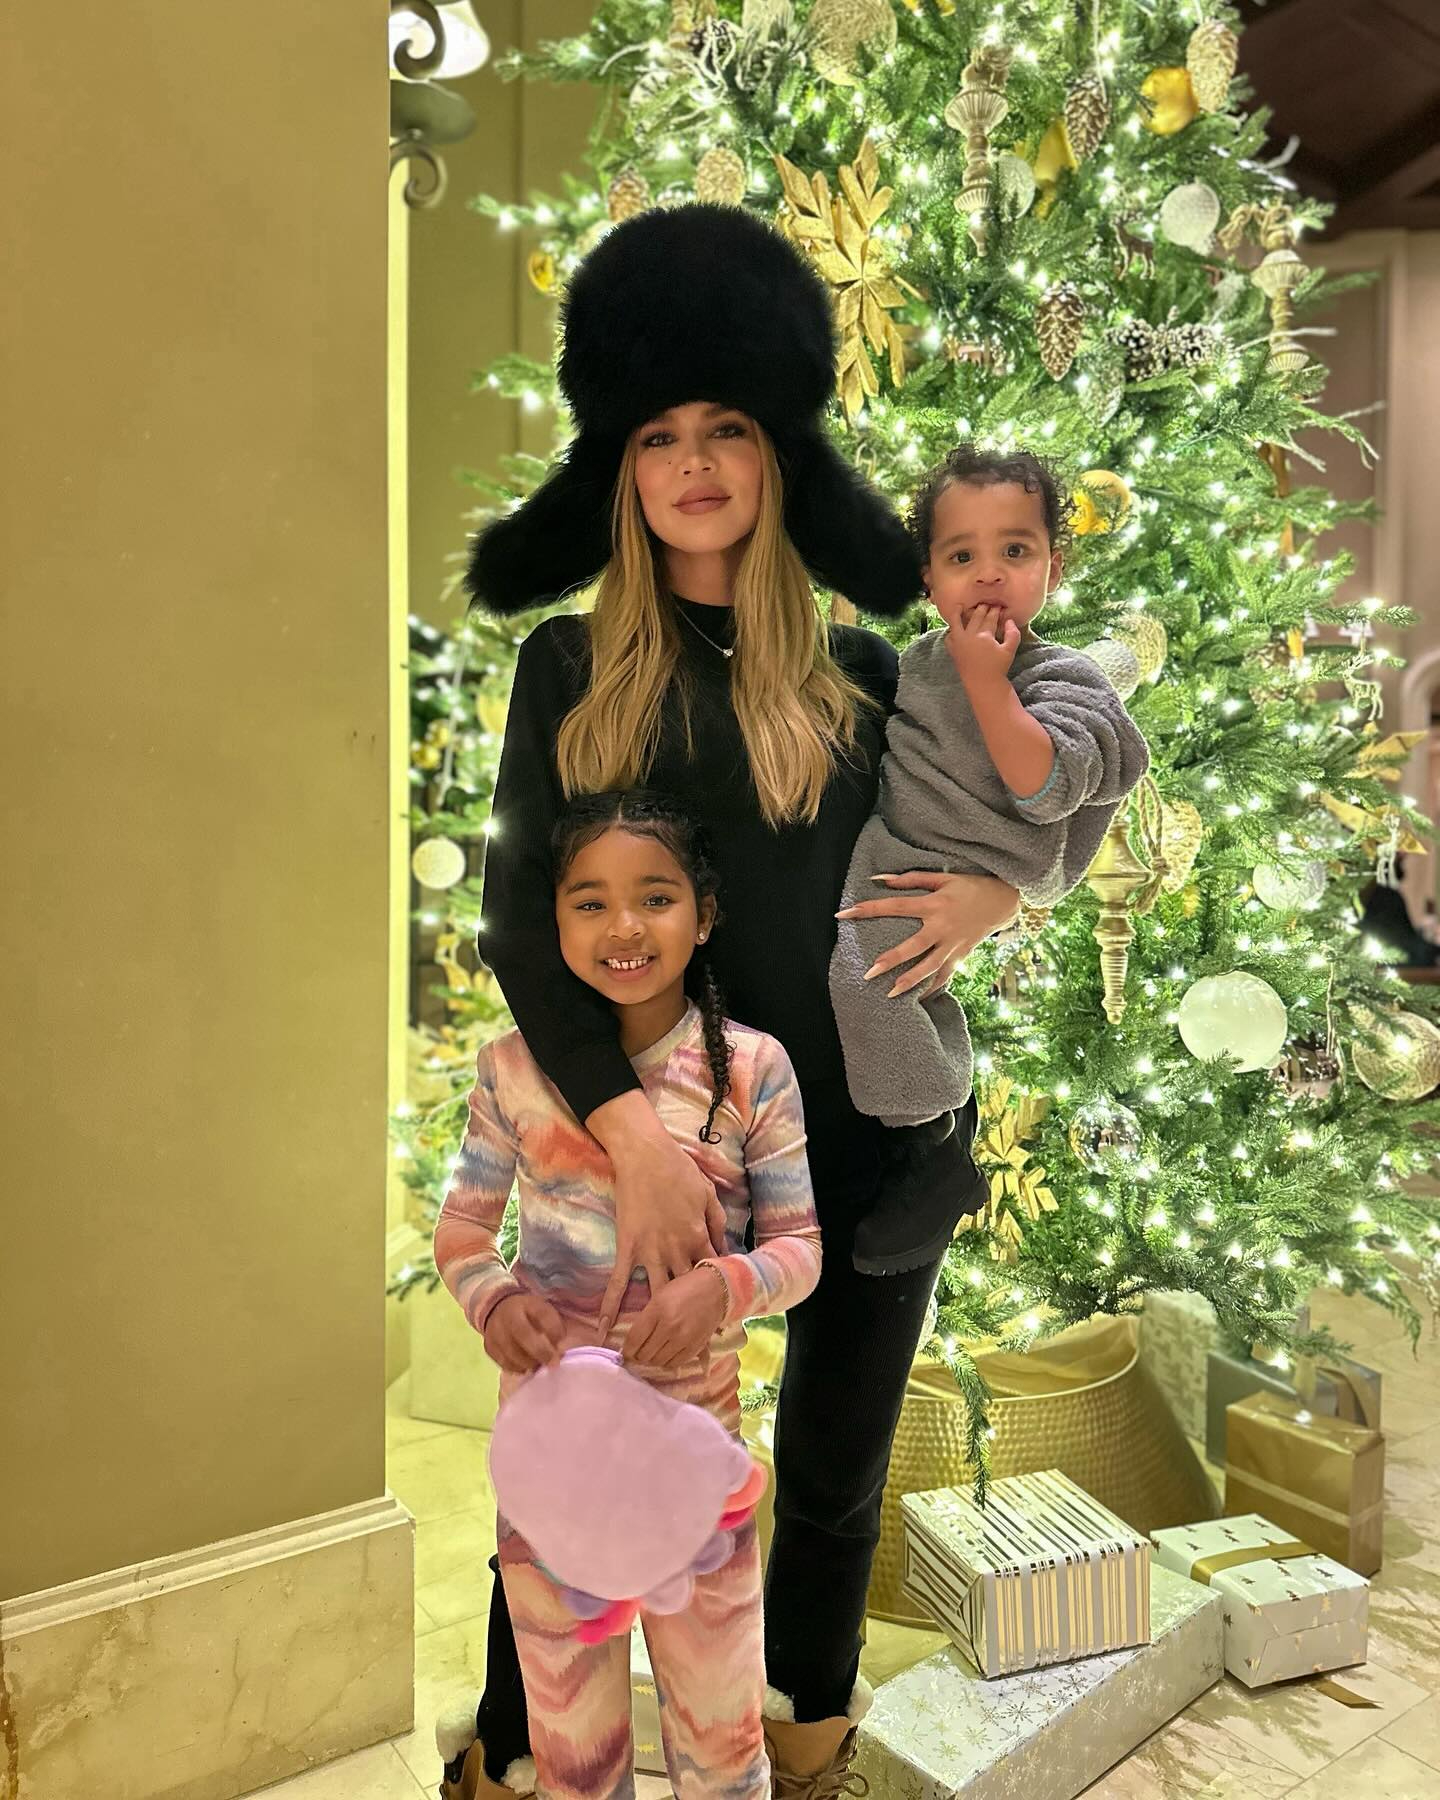 It's not the first time Khloe has created controversy over photos of her children